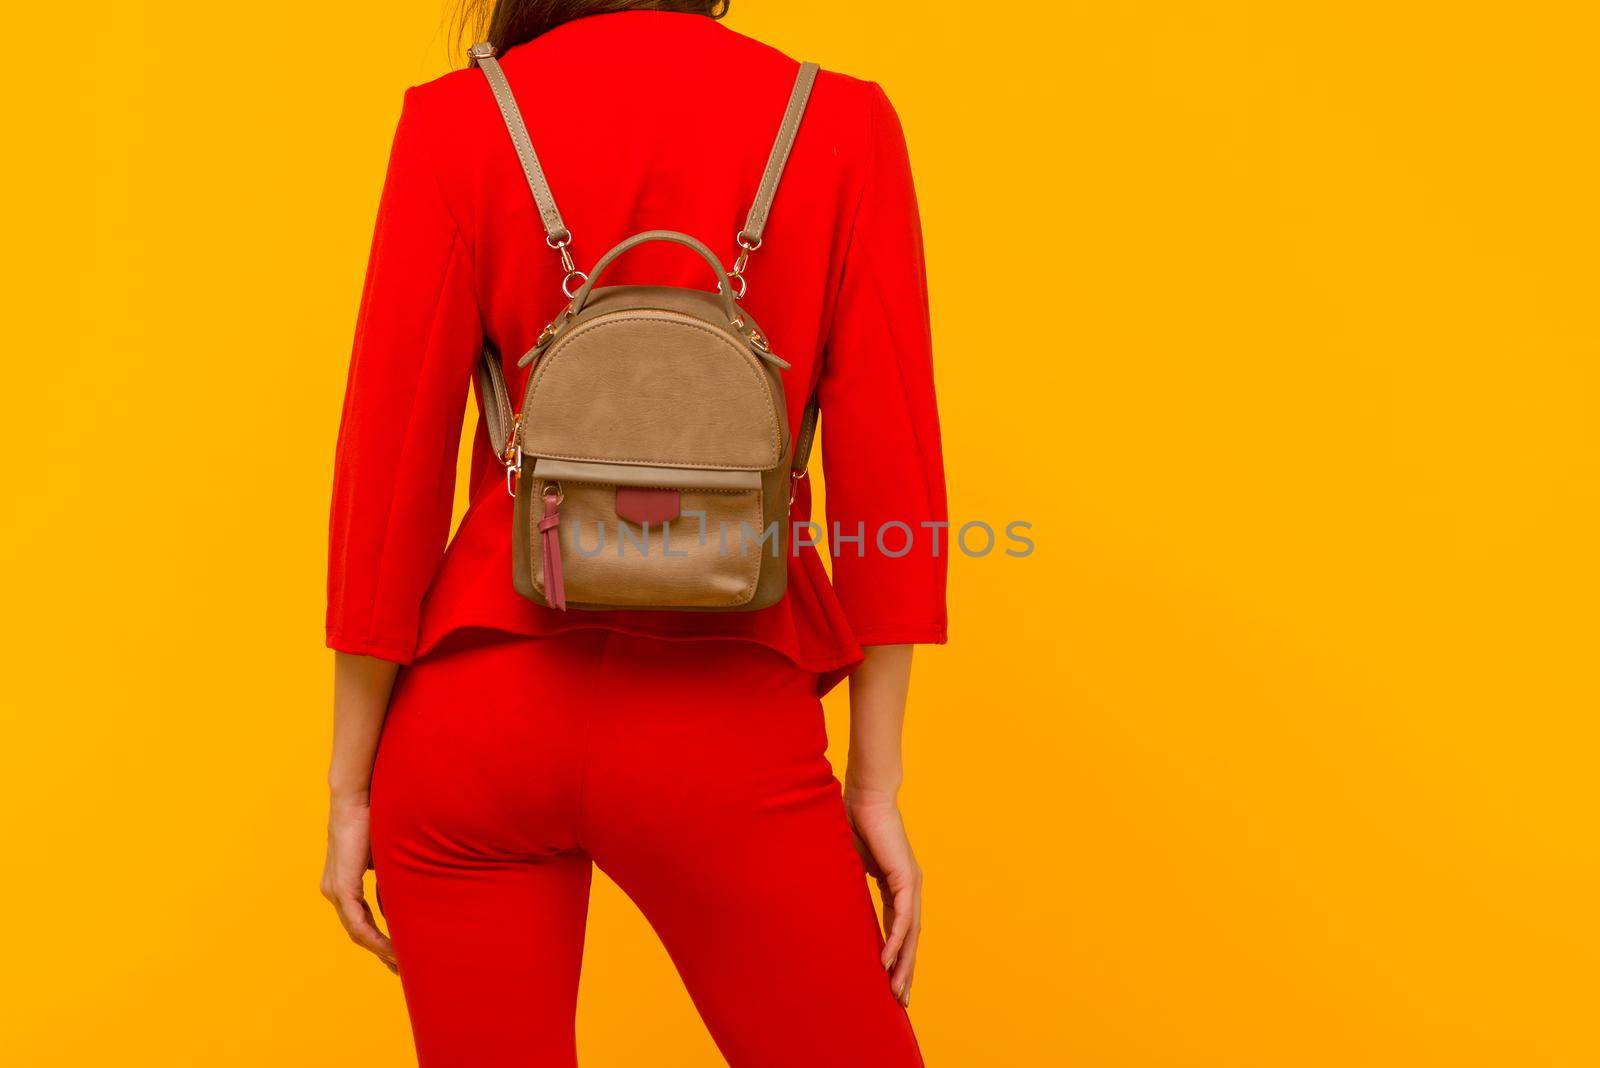 Young girl in a red suit with a small backpack on a yellow background - image